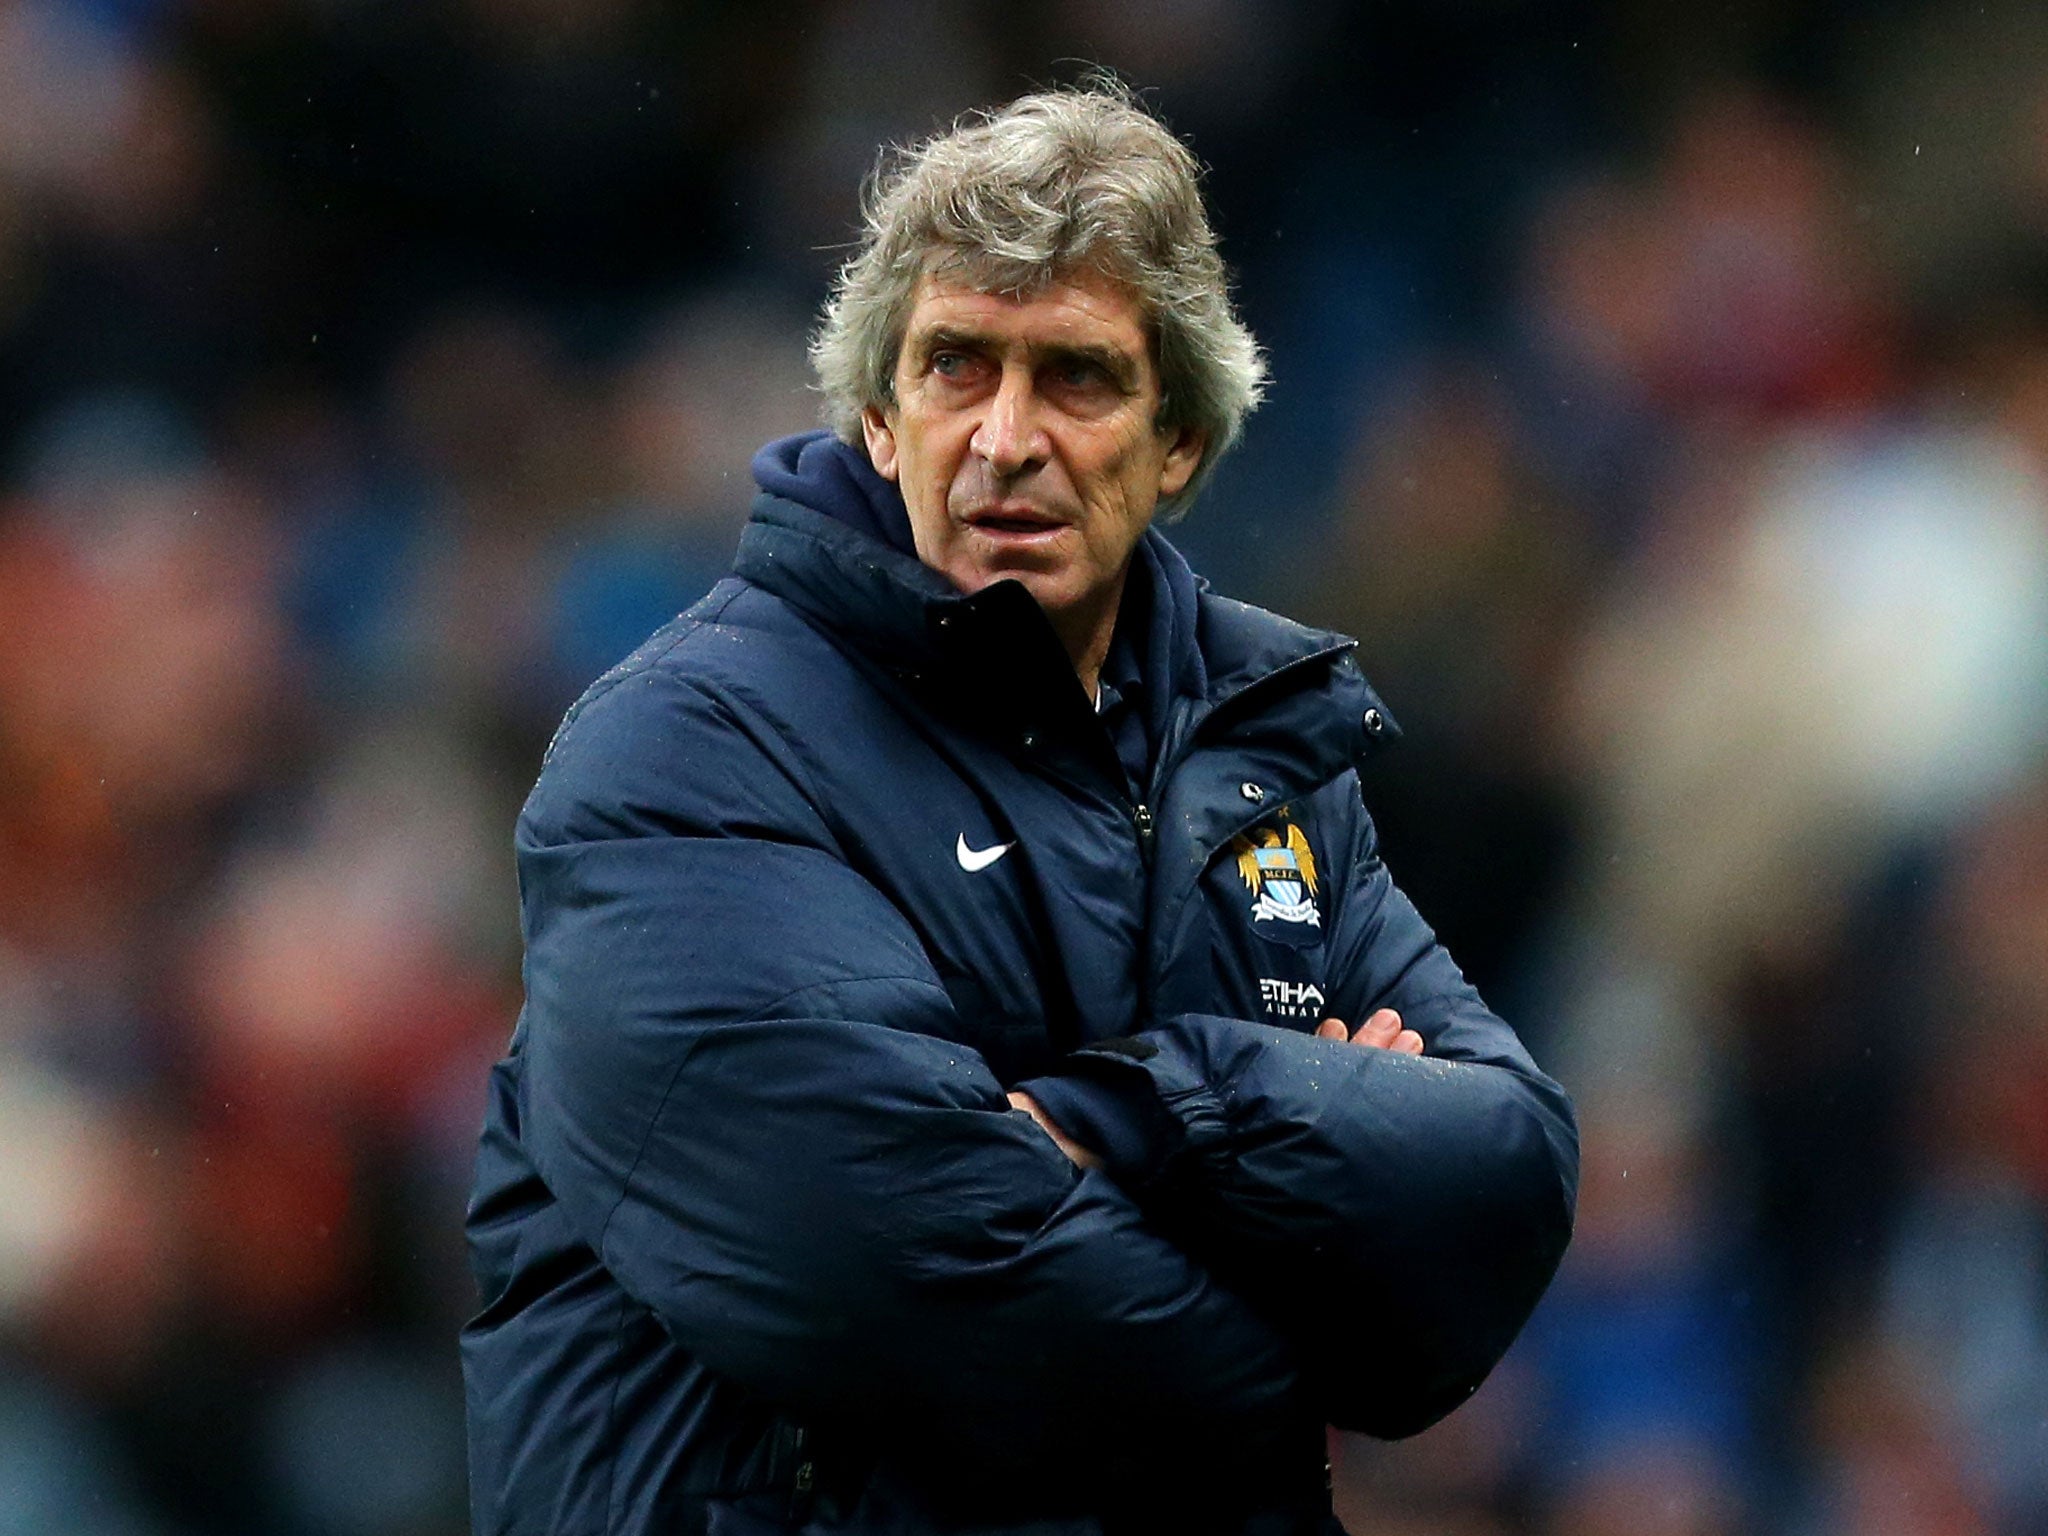 Manuel Pellegrini has brought calm and aassurance to City